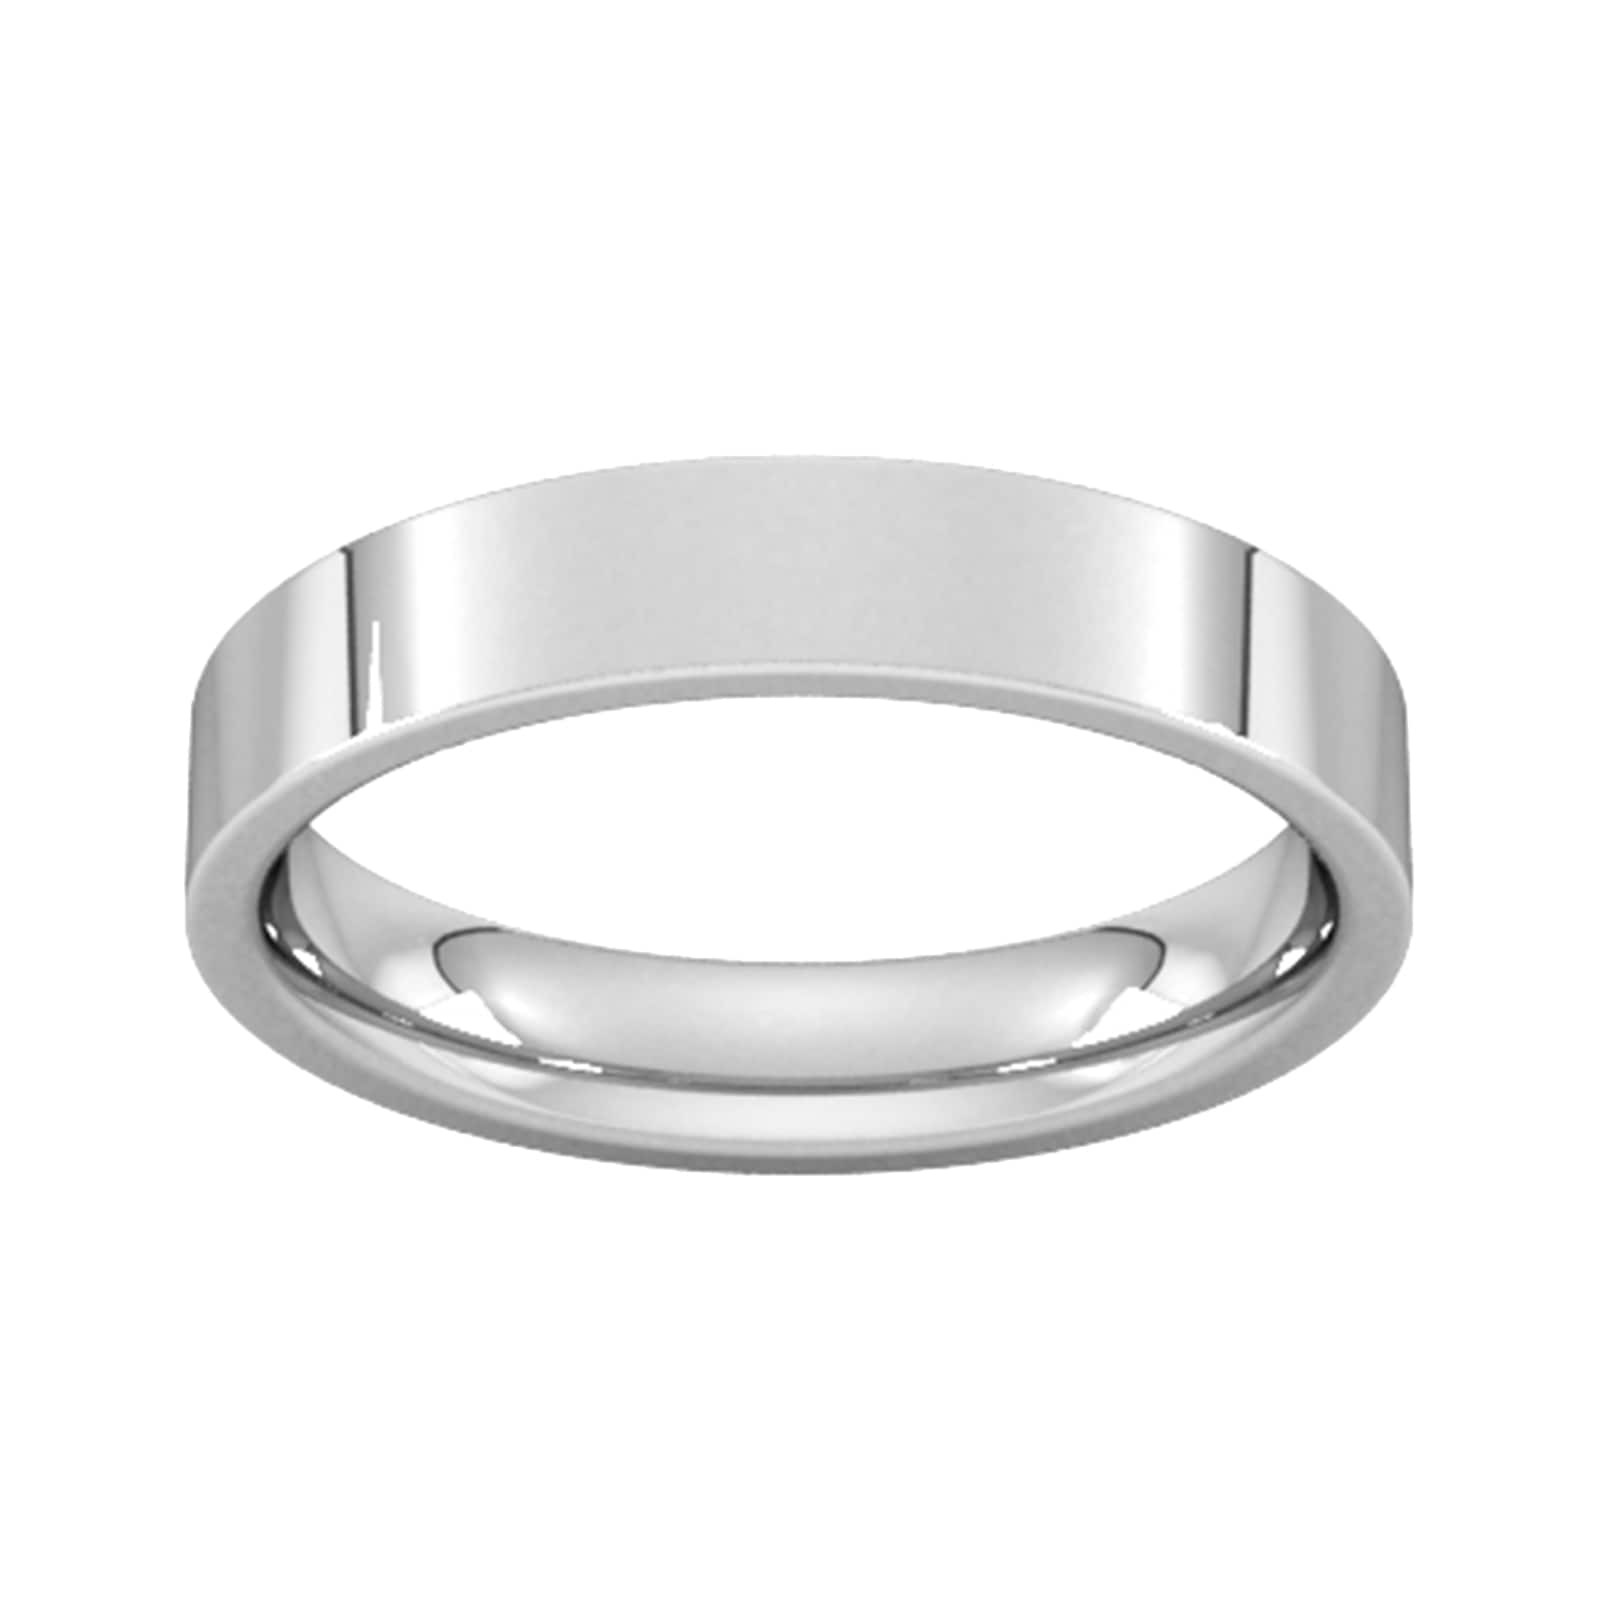 4mm Flat Court Heavy Wedding Ring In 18 Carat White Gold - Ring Size R